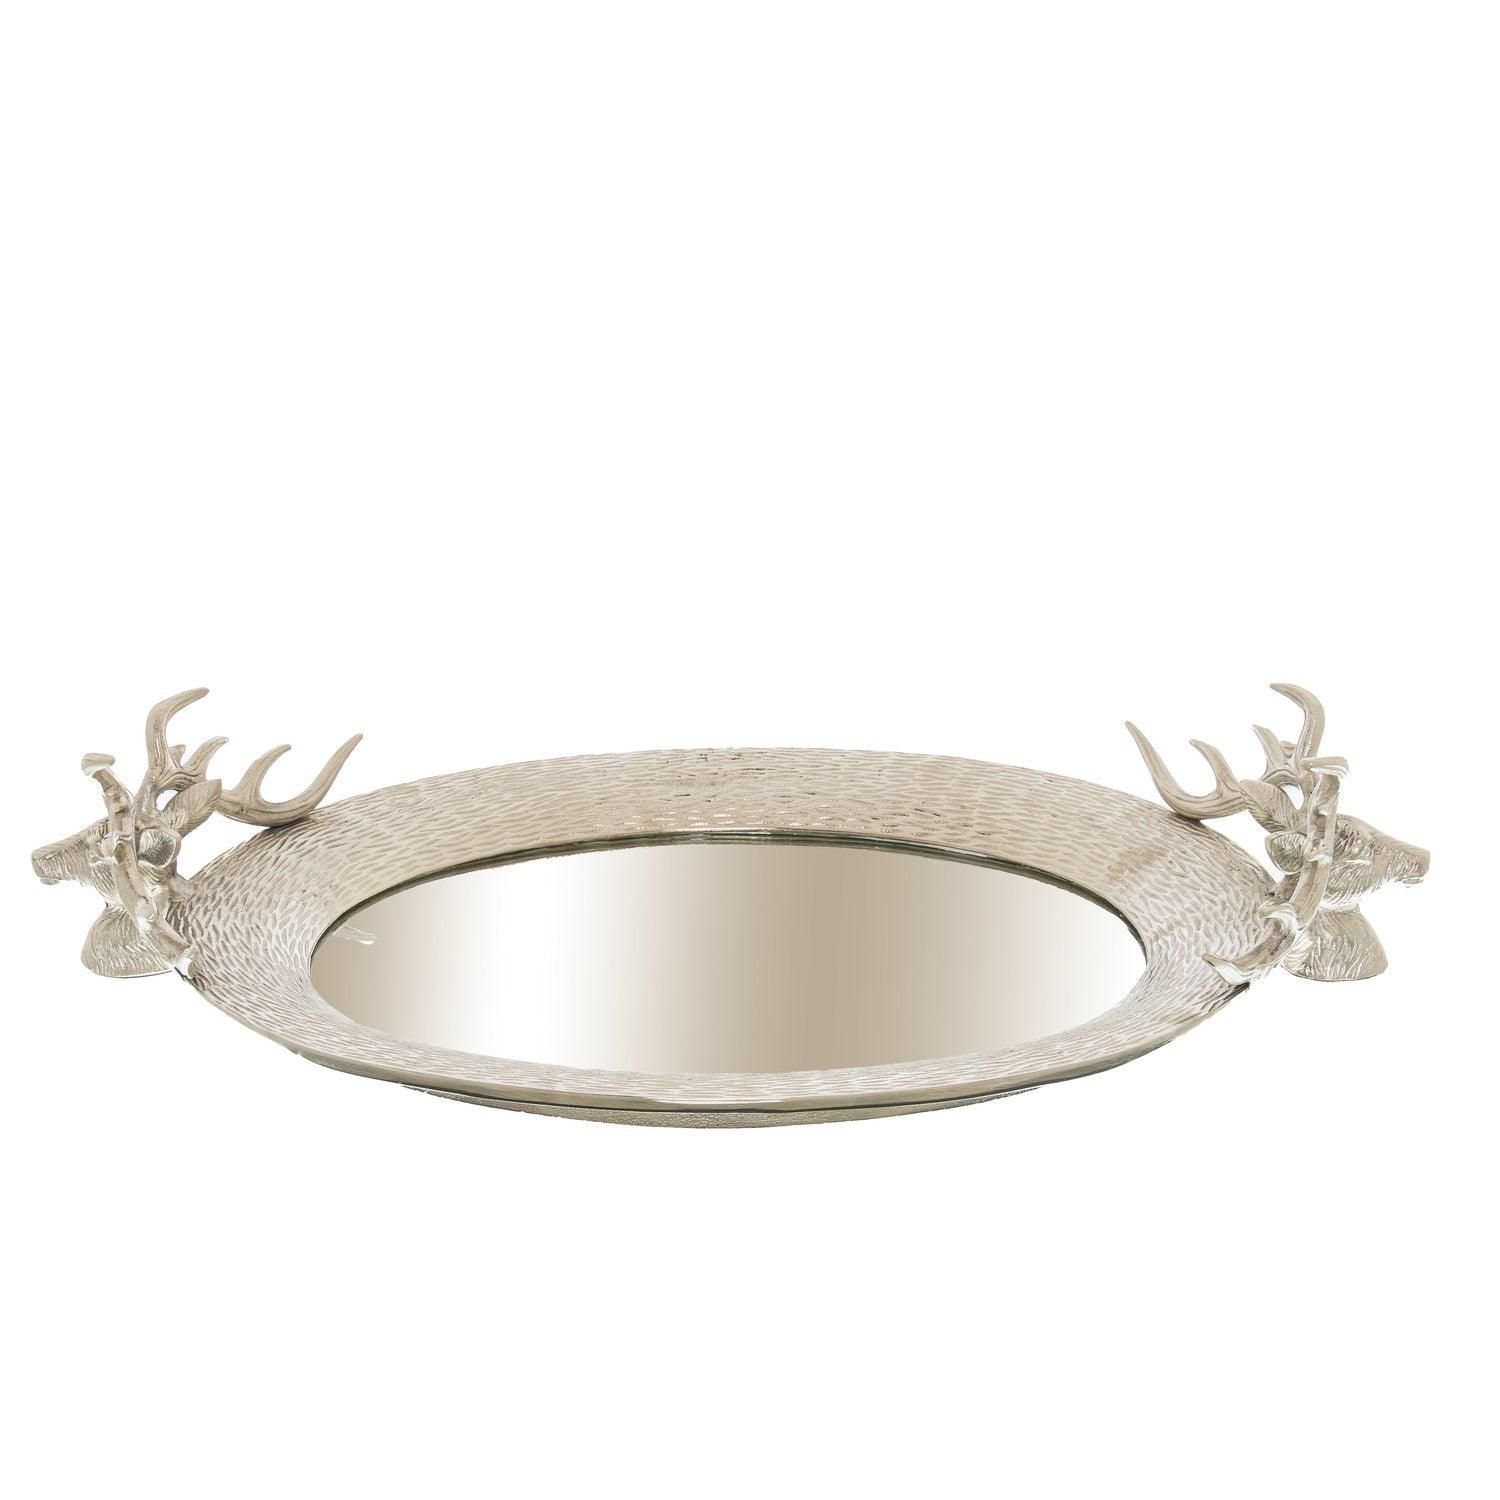 Large Mirrored Tray With Stag Heads - Vookoo Lifestyle